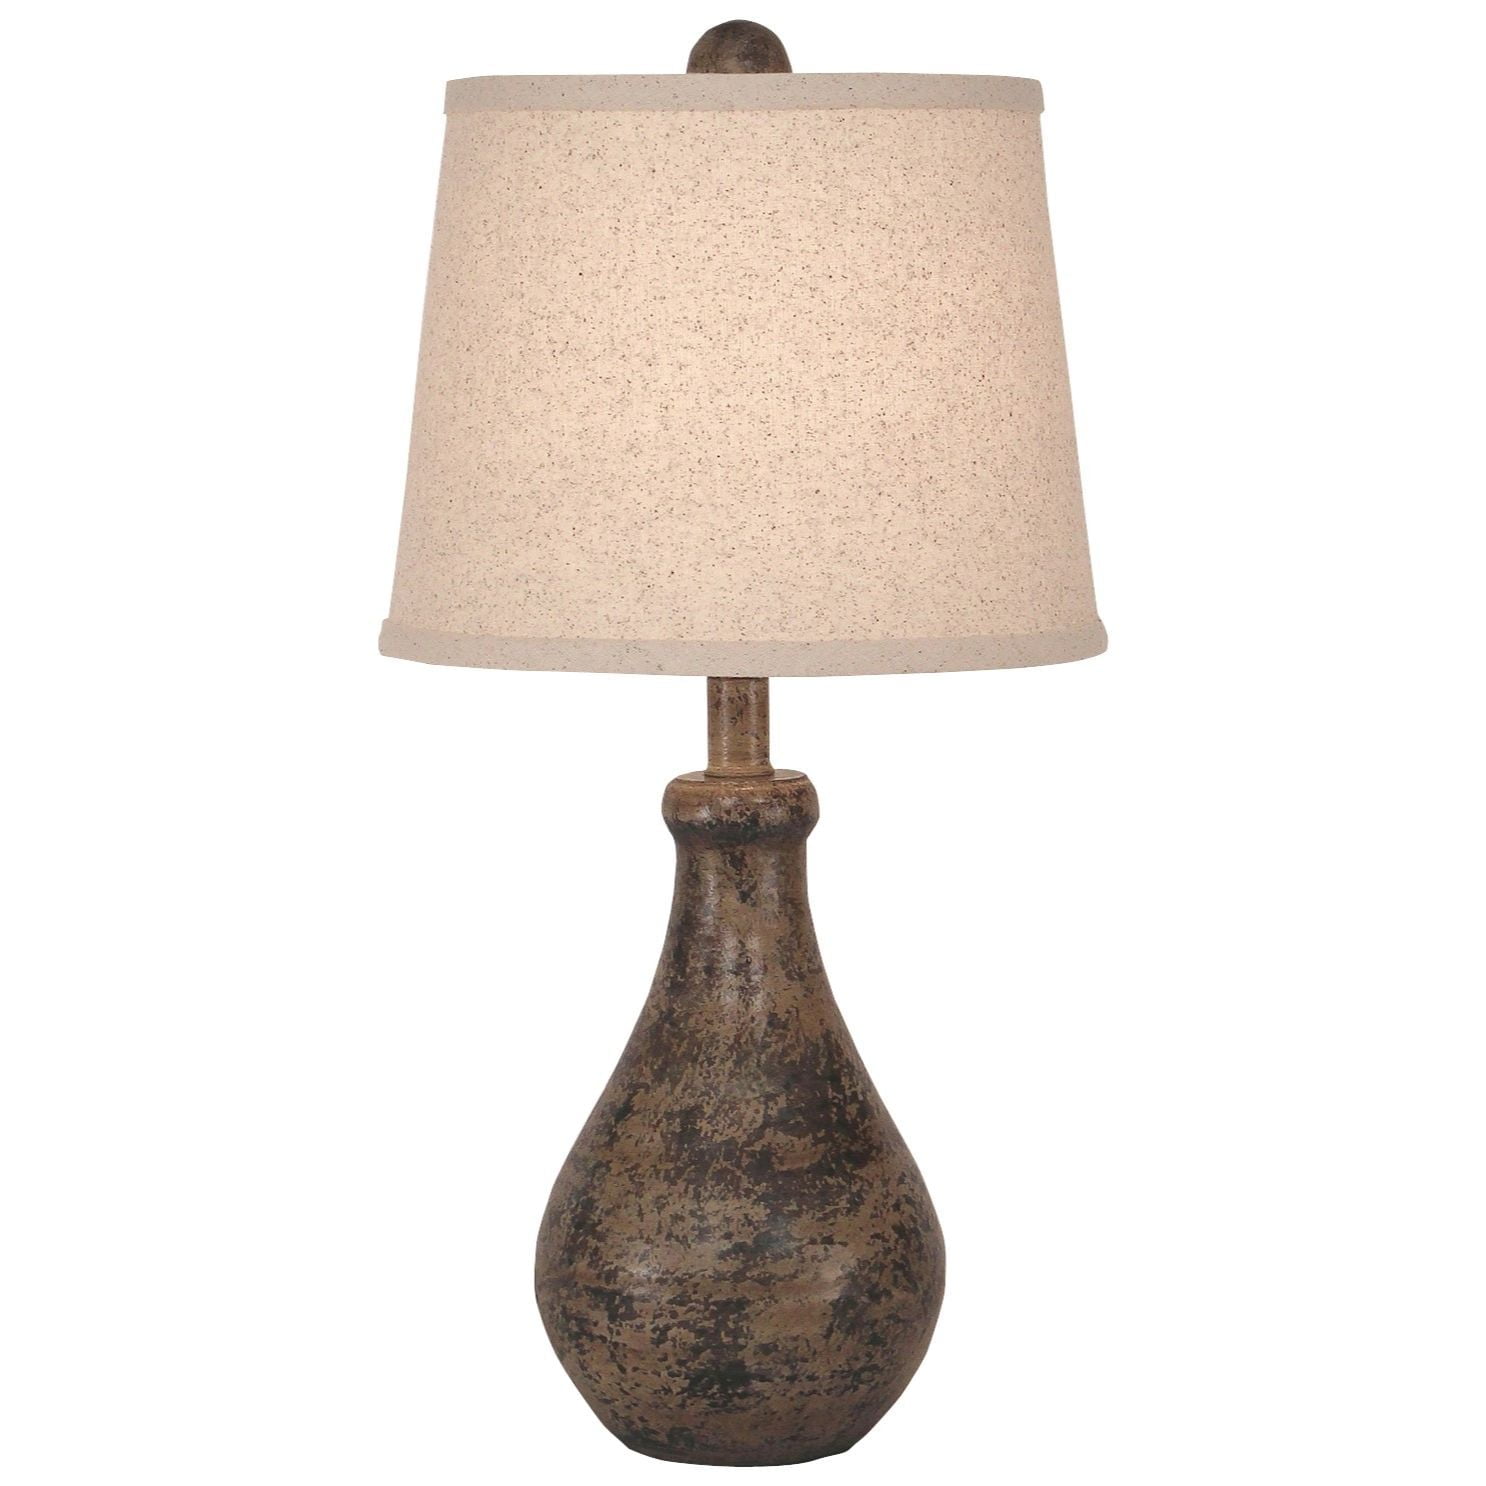 Small Clay Pot Table Lamp